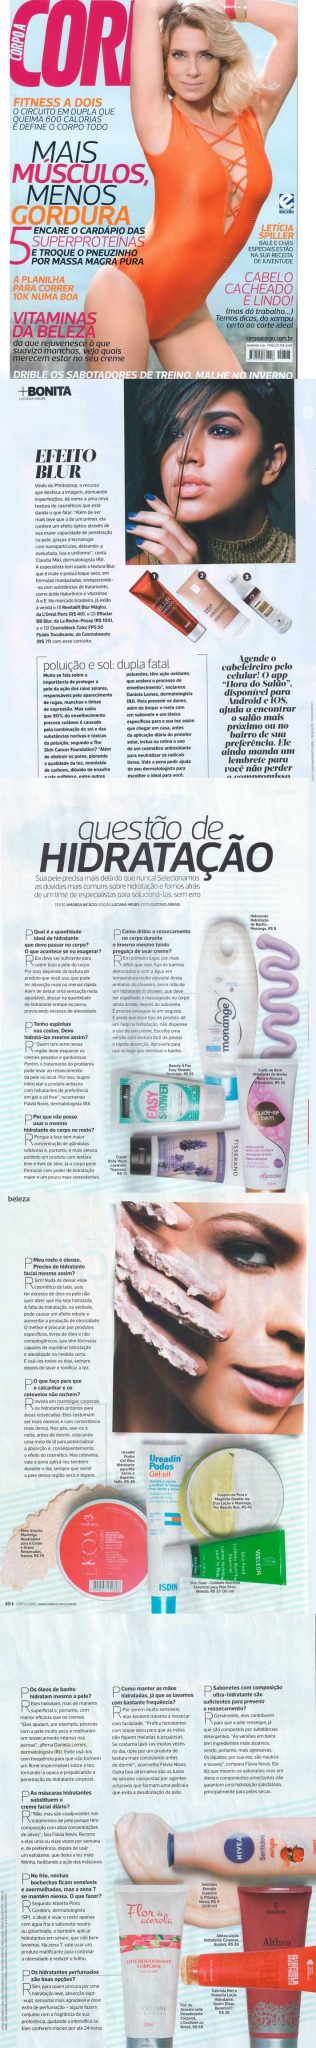 clipping-completo-daniela-lemes